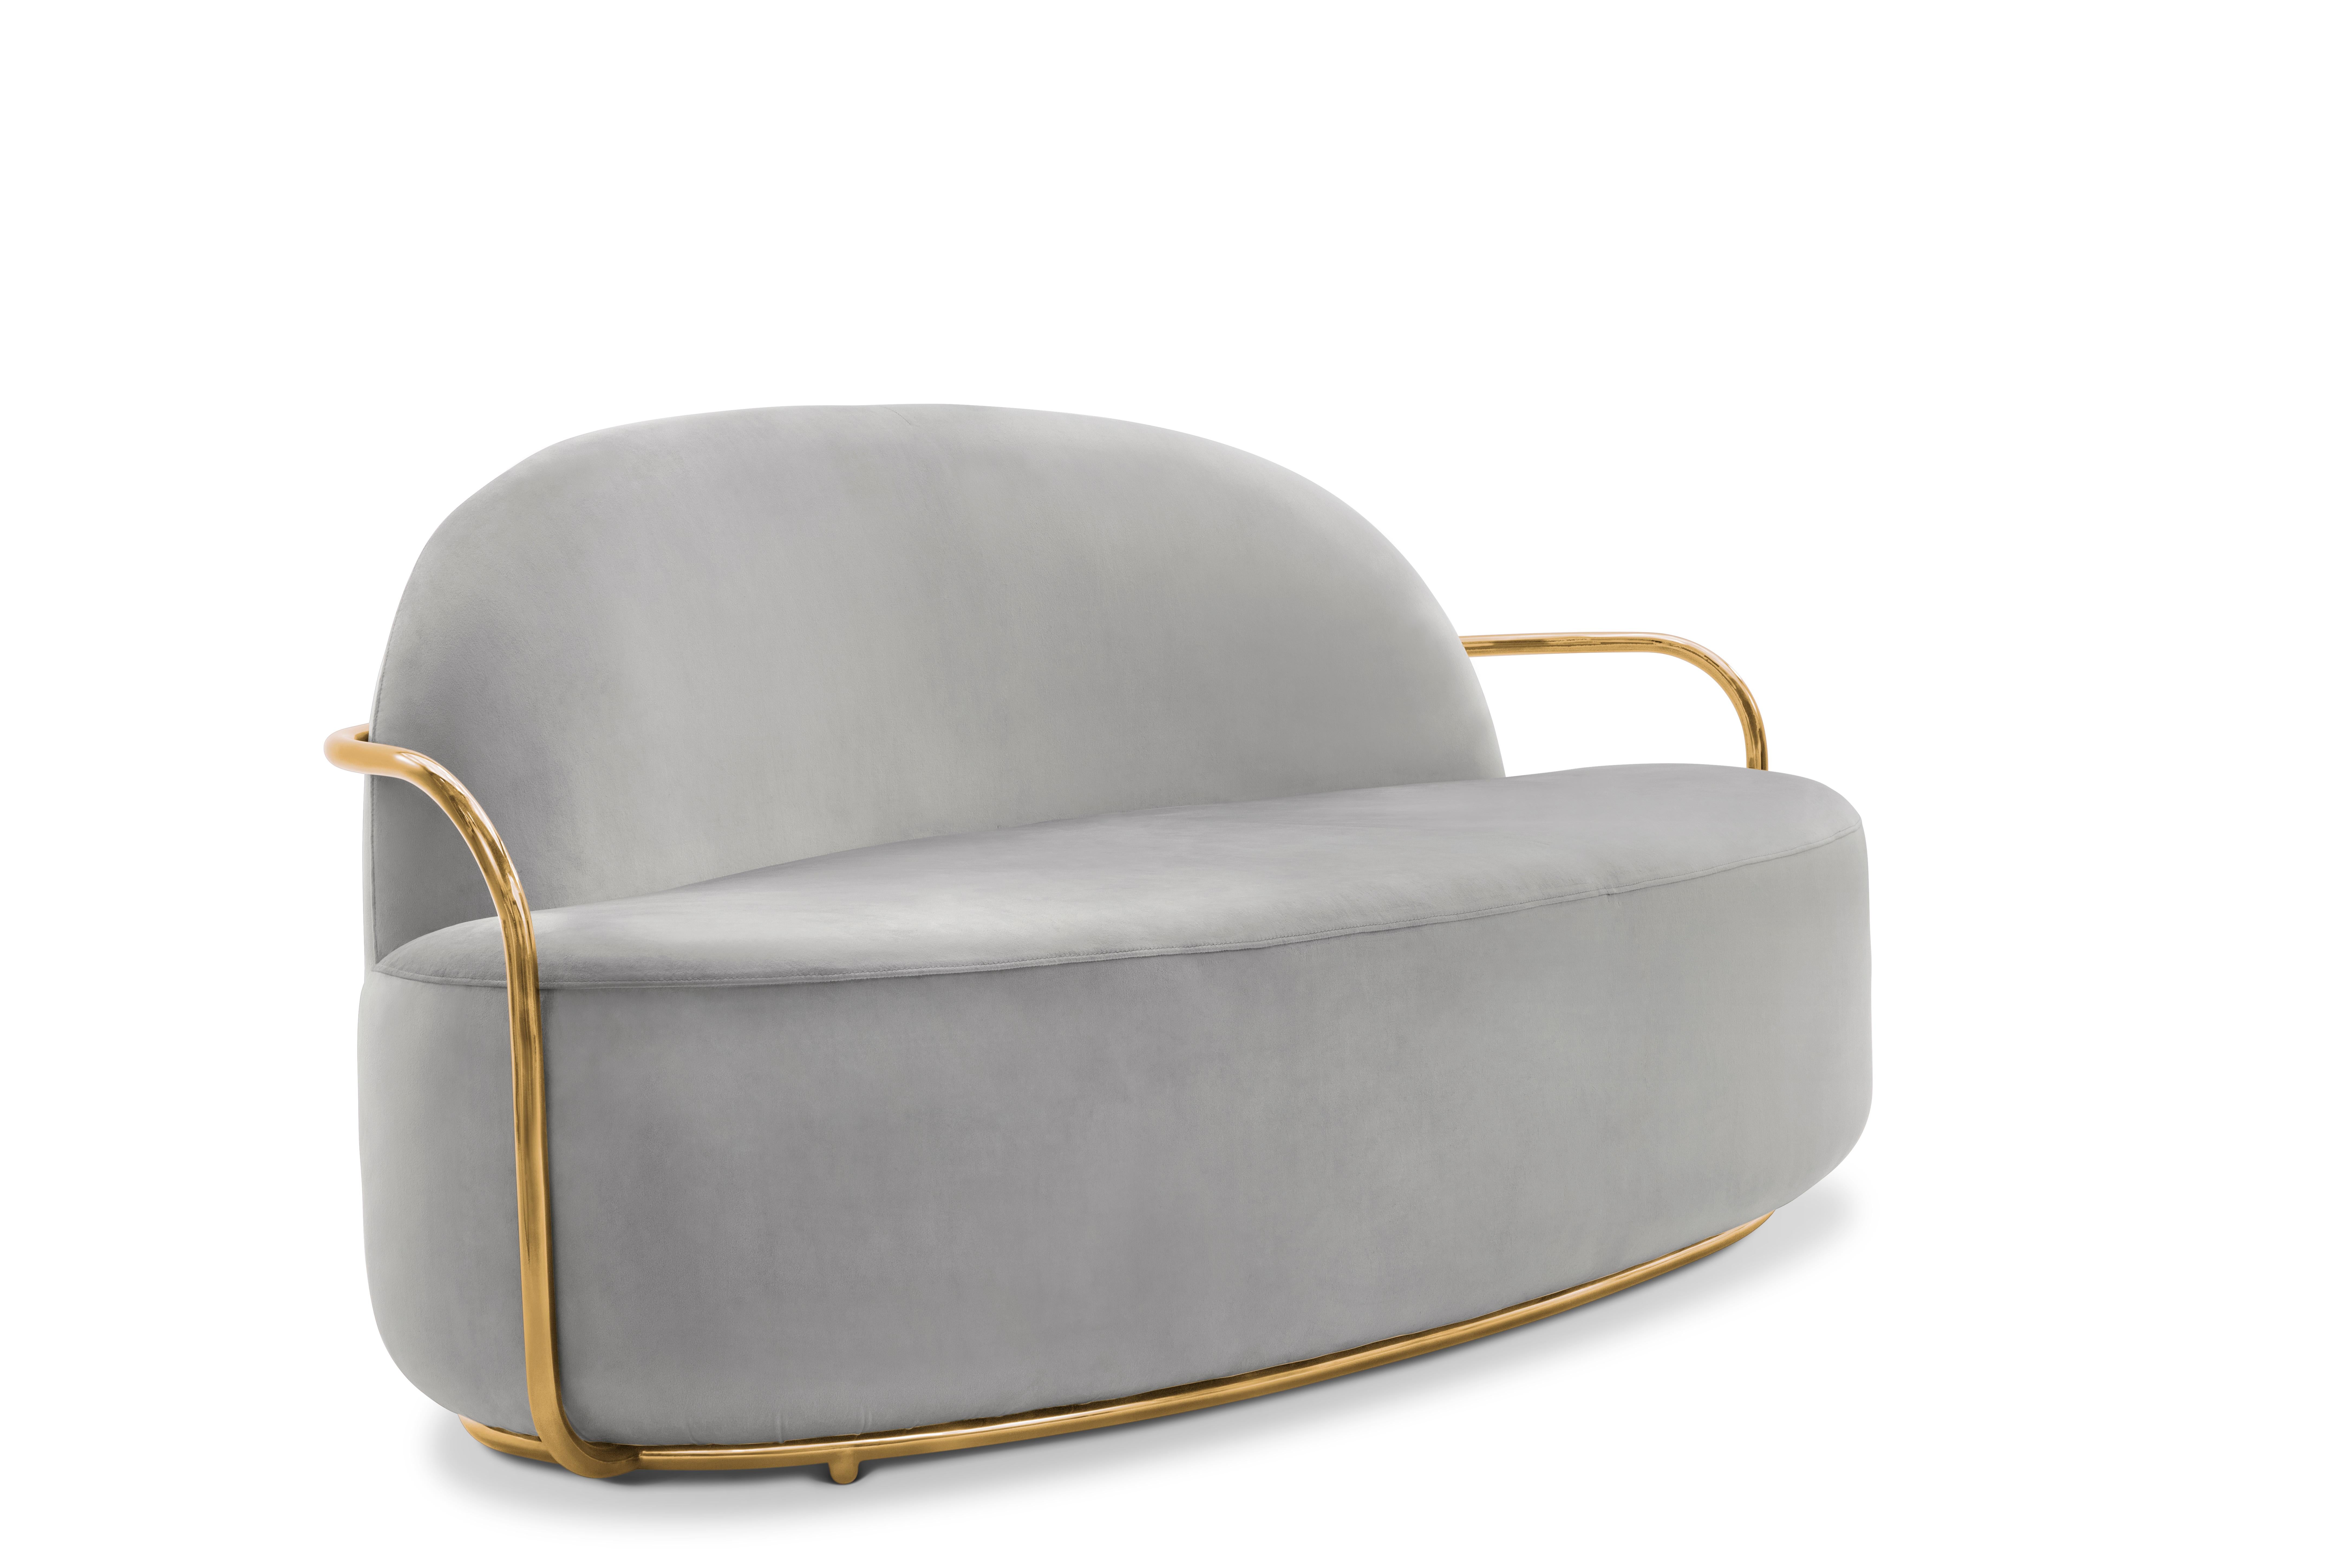 Hand-Crafted Orion 3 Seat Sofa with Plush Gray Velvet and Gold Arms by Nika Zupanc For Sale